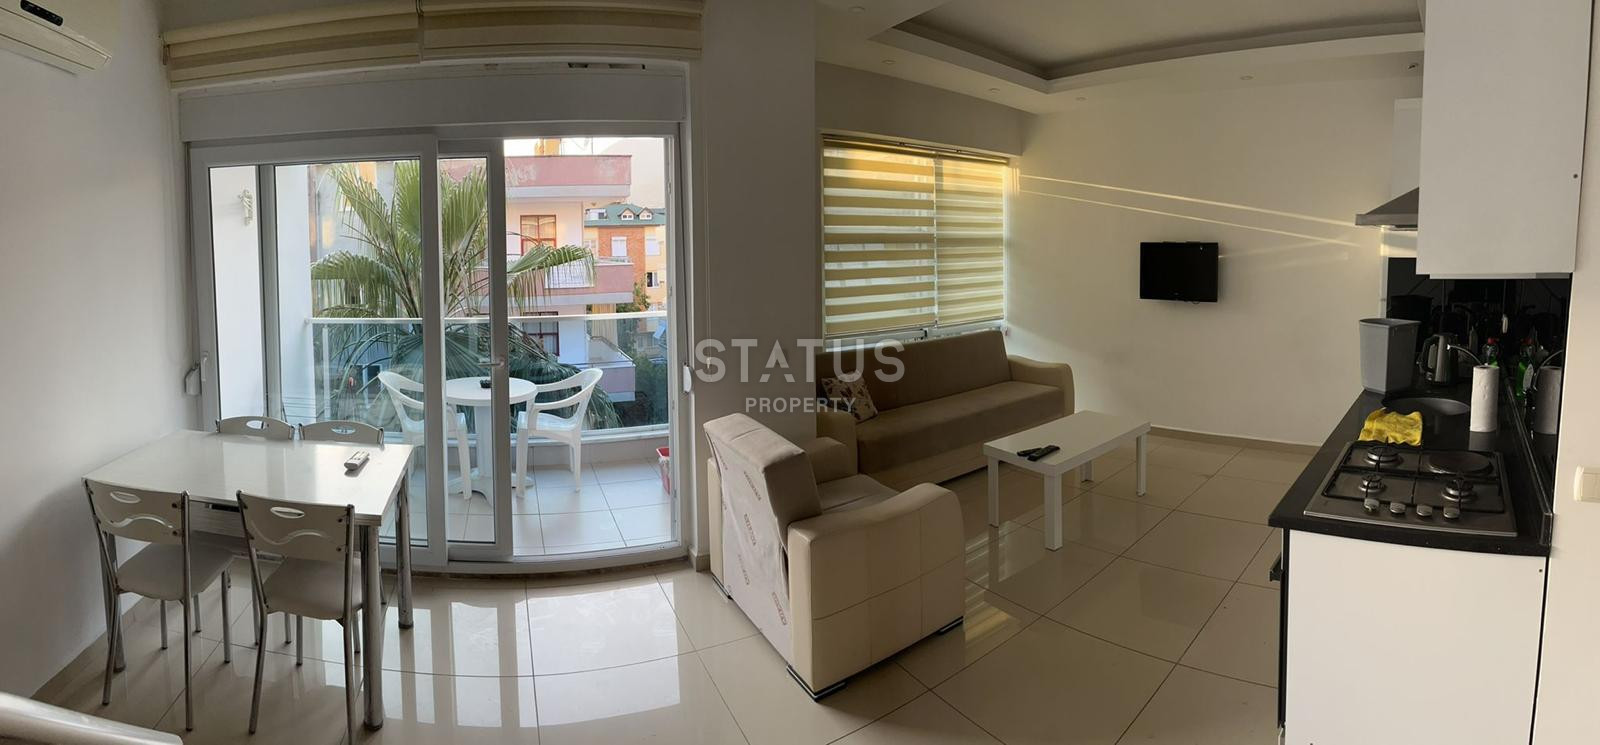 Status Property campaign offers you luxurious two-level apartments in the center of Alanya 2+1. 105m2 фото 1